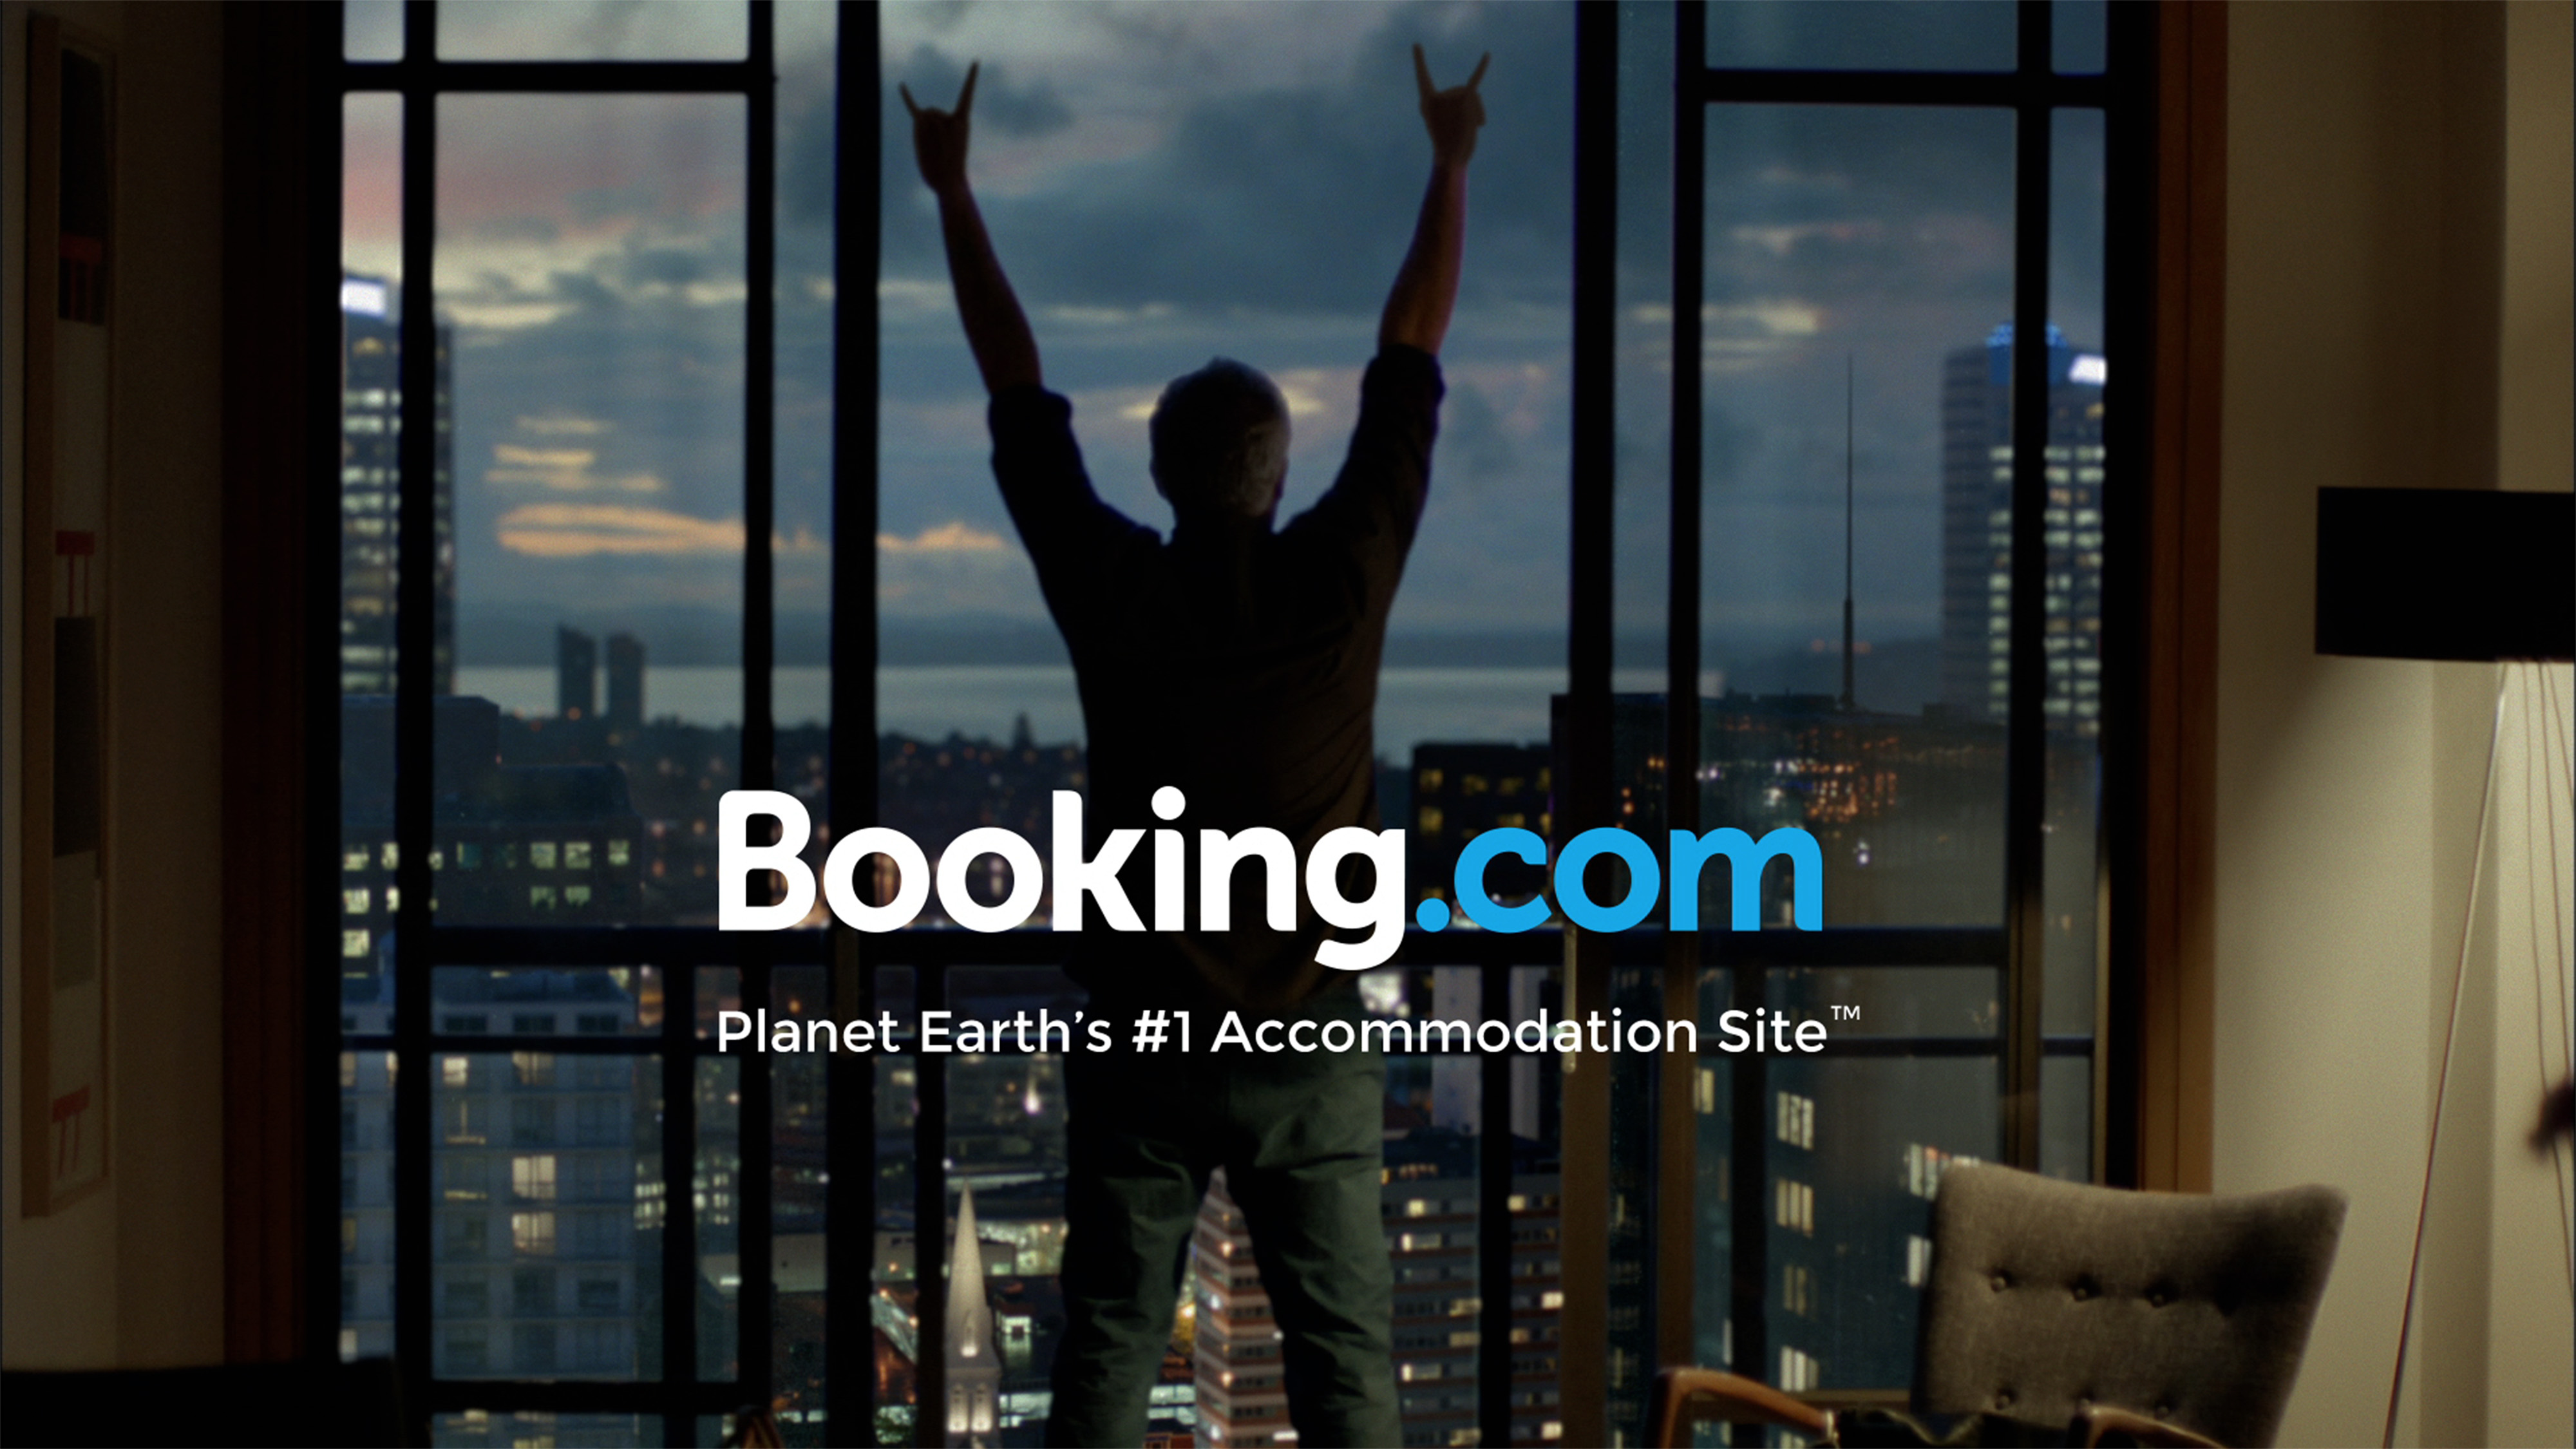 Booking com saw  8B mobile bookings last year  from  3B 2012